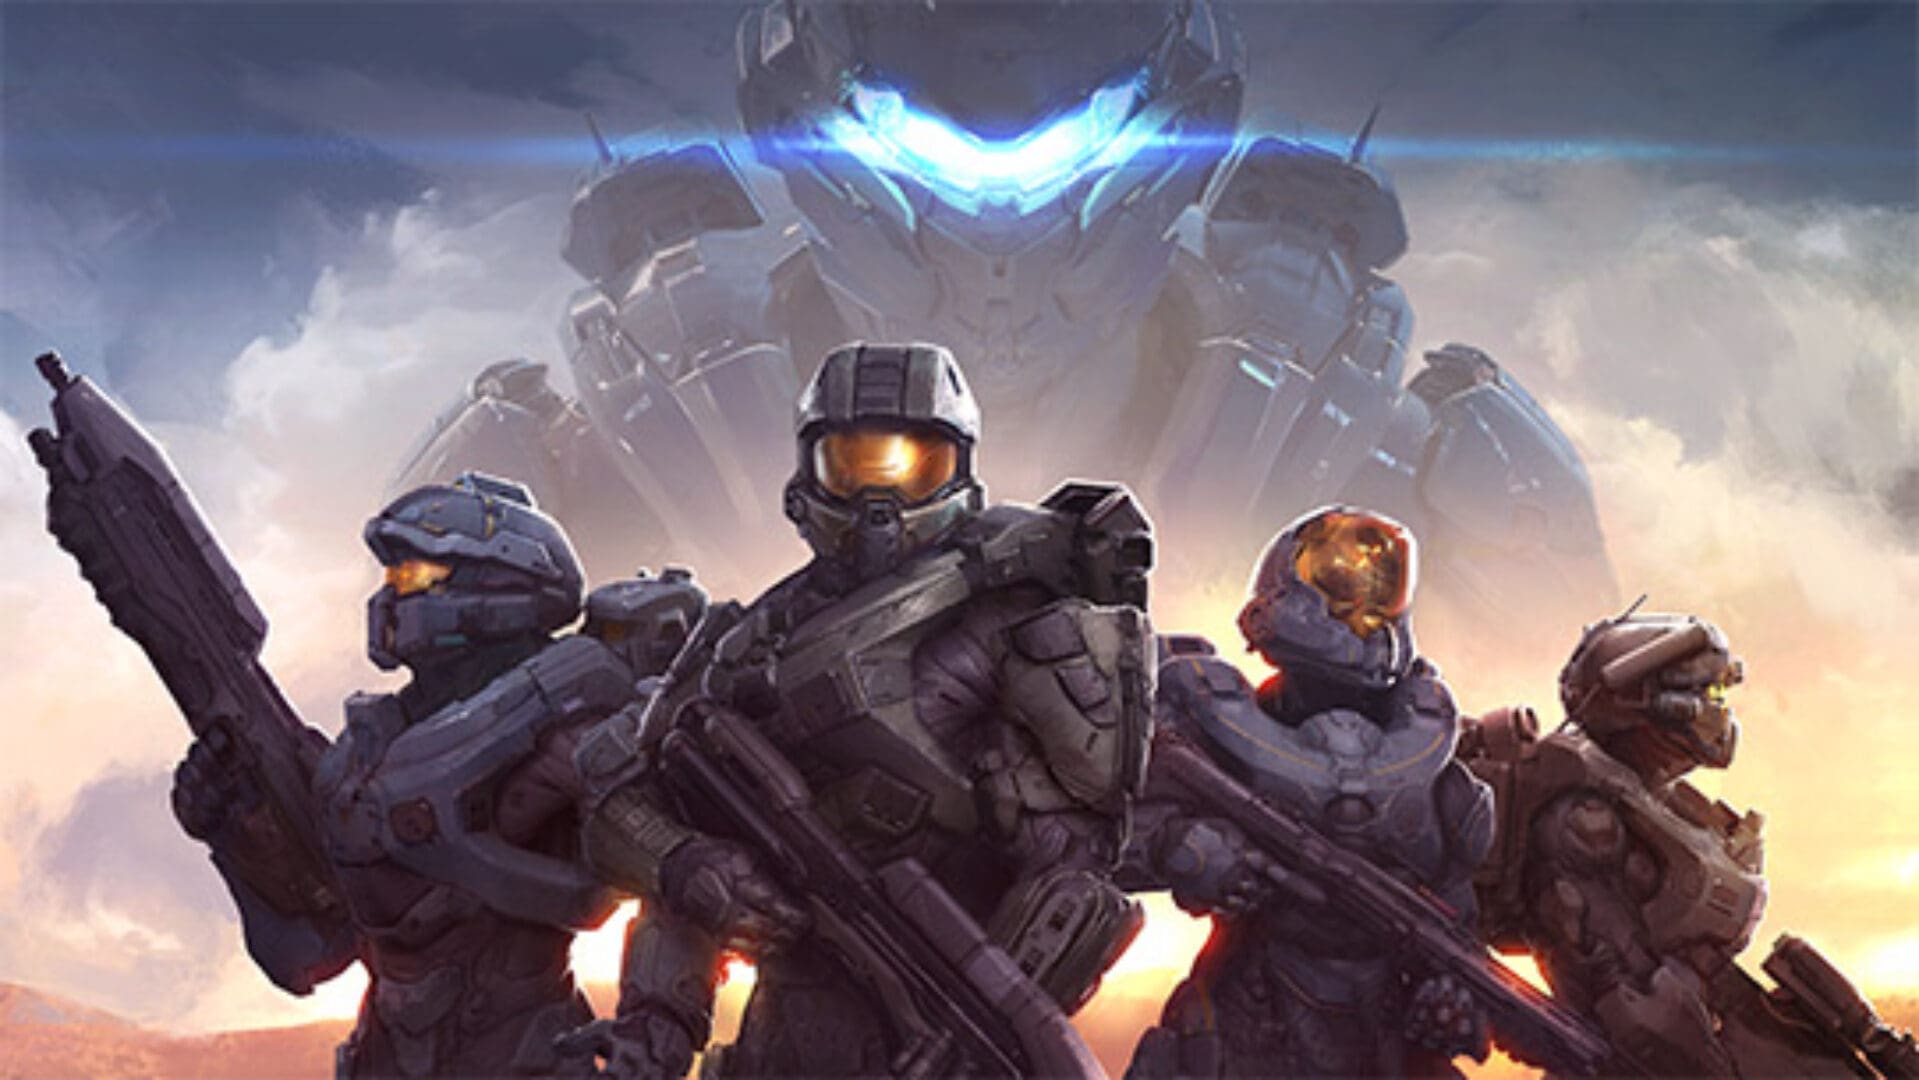 Halo 5: Guardians Has Gone Gold!